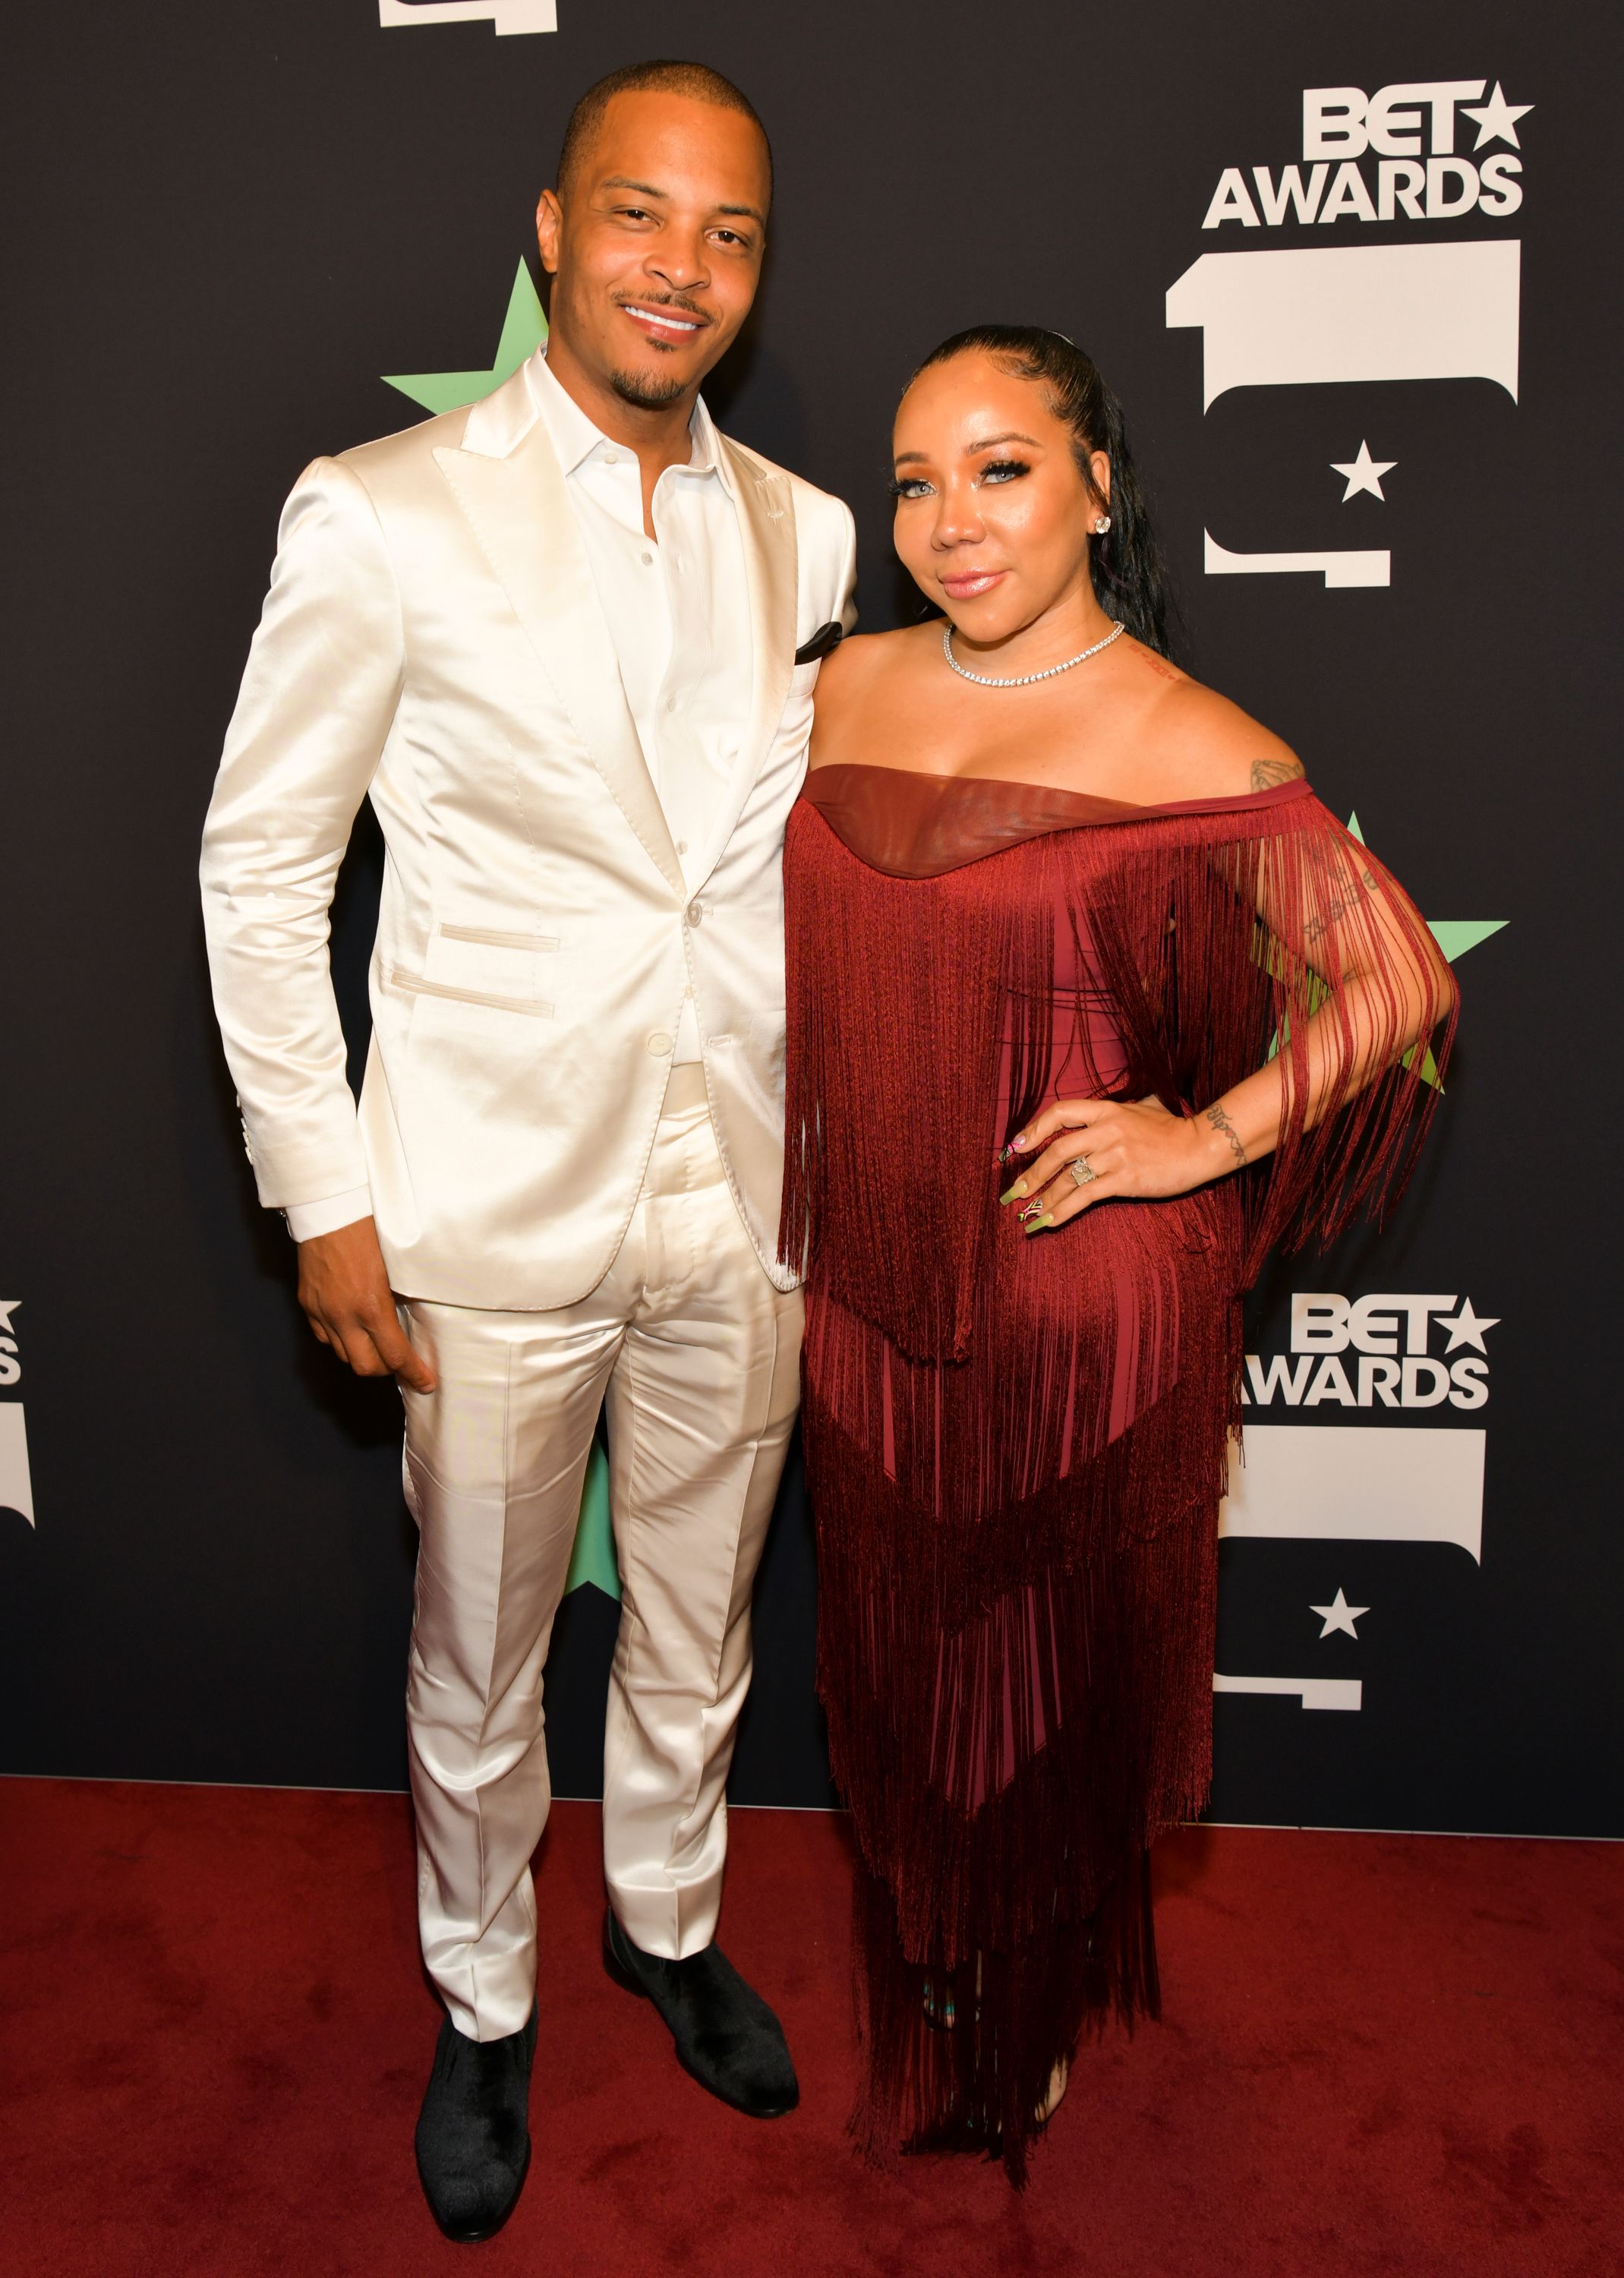 T.I. and Tiny Harris at the 2019 BET Awards on June 23, 2019 in Los Angeles, California. | Photo: Getty Images